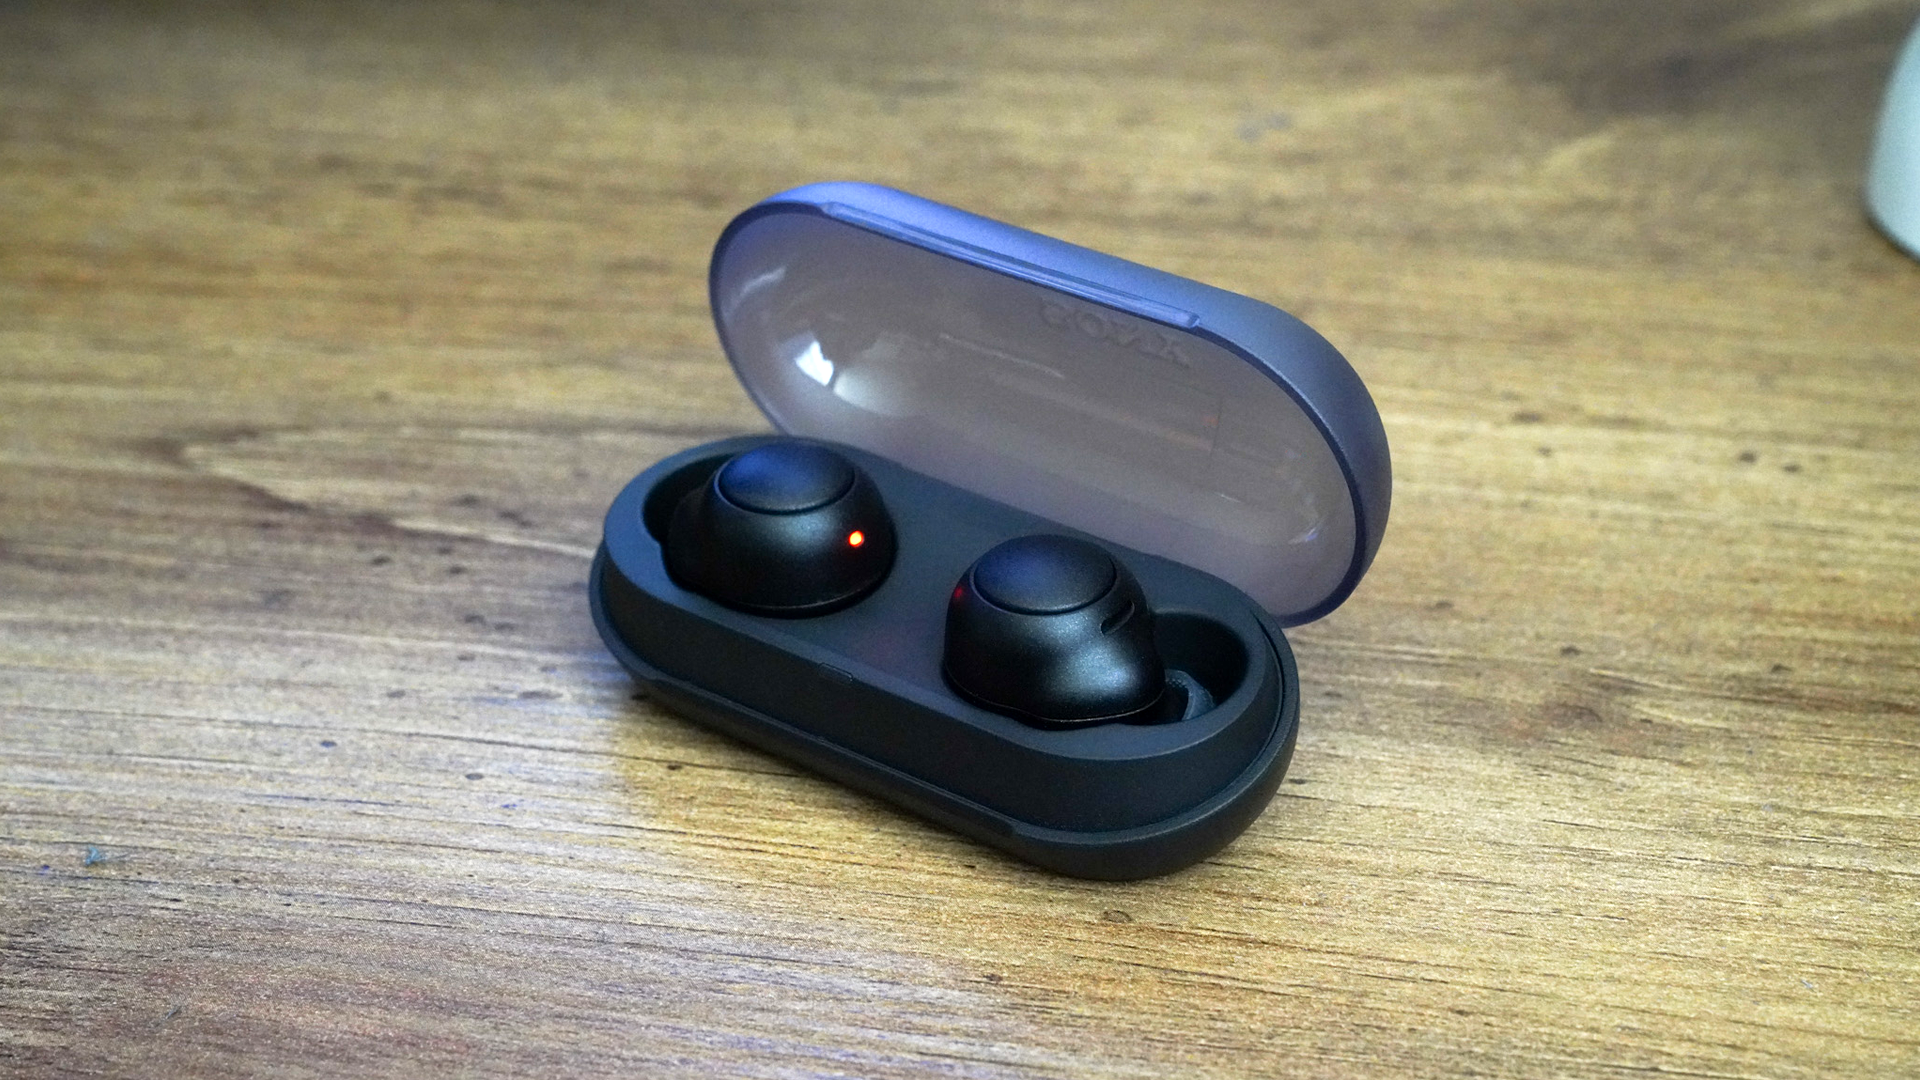 Sony WF-C500 Earbuds Review: Great Sound, Long Battery Life